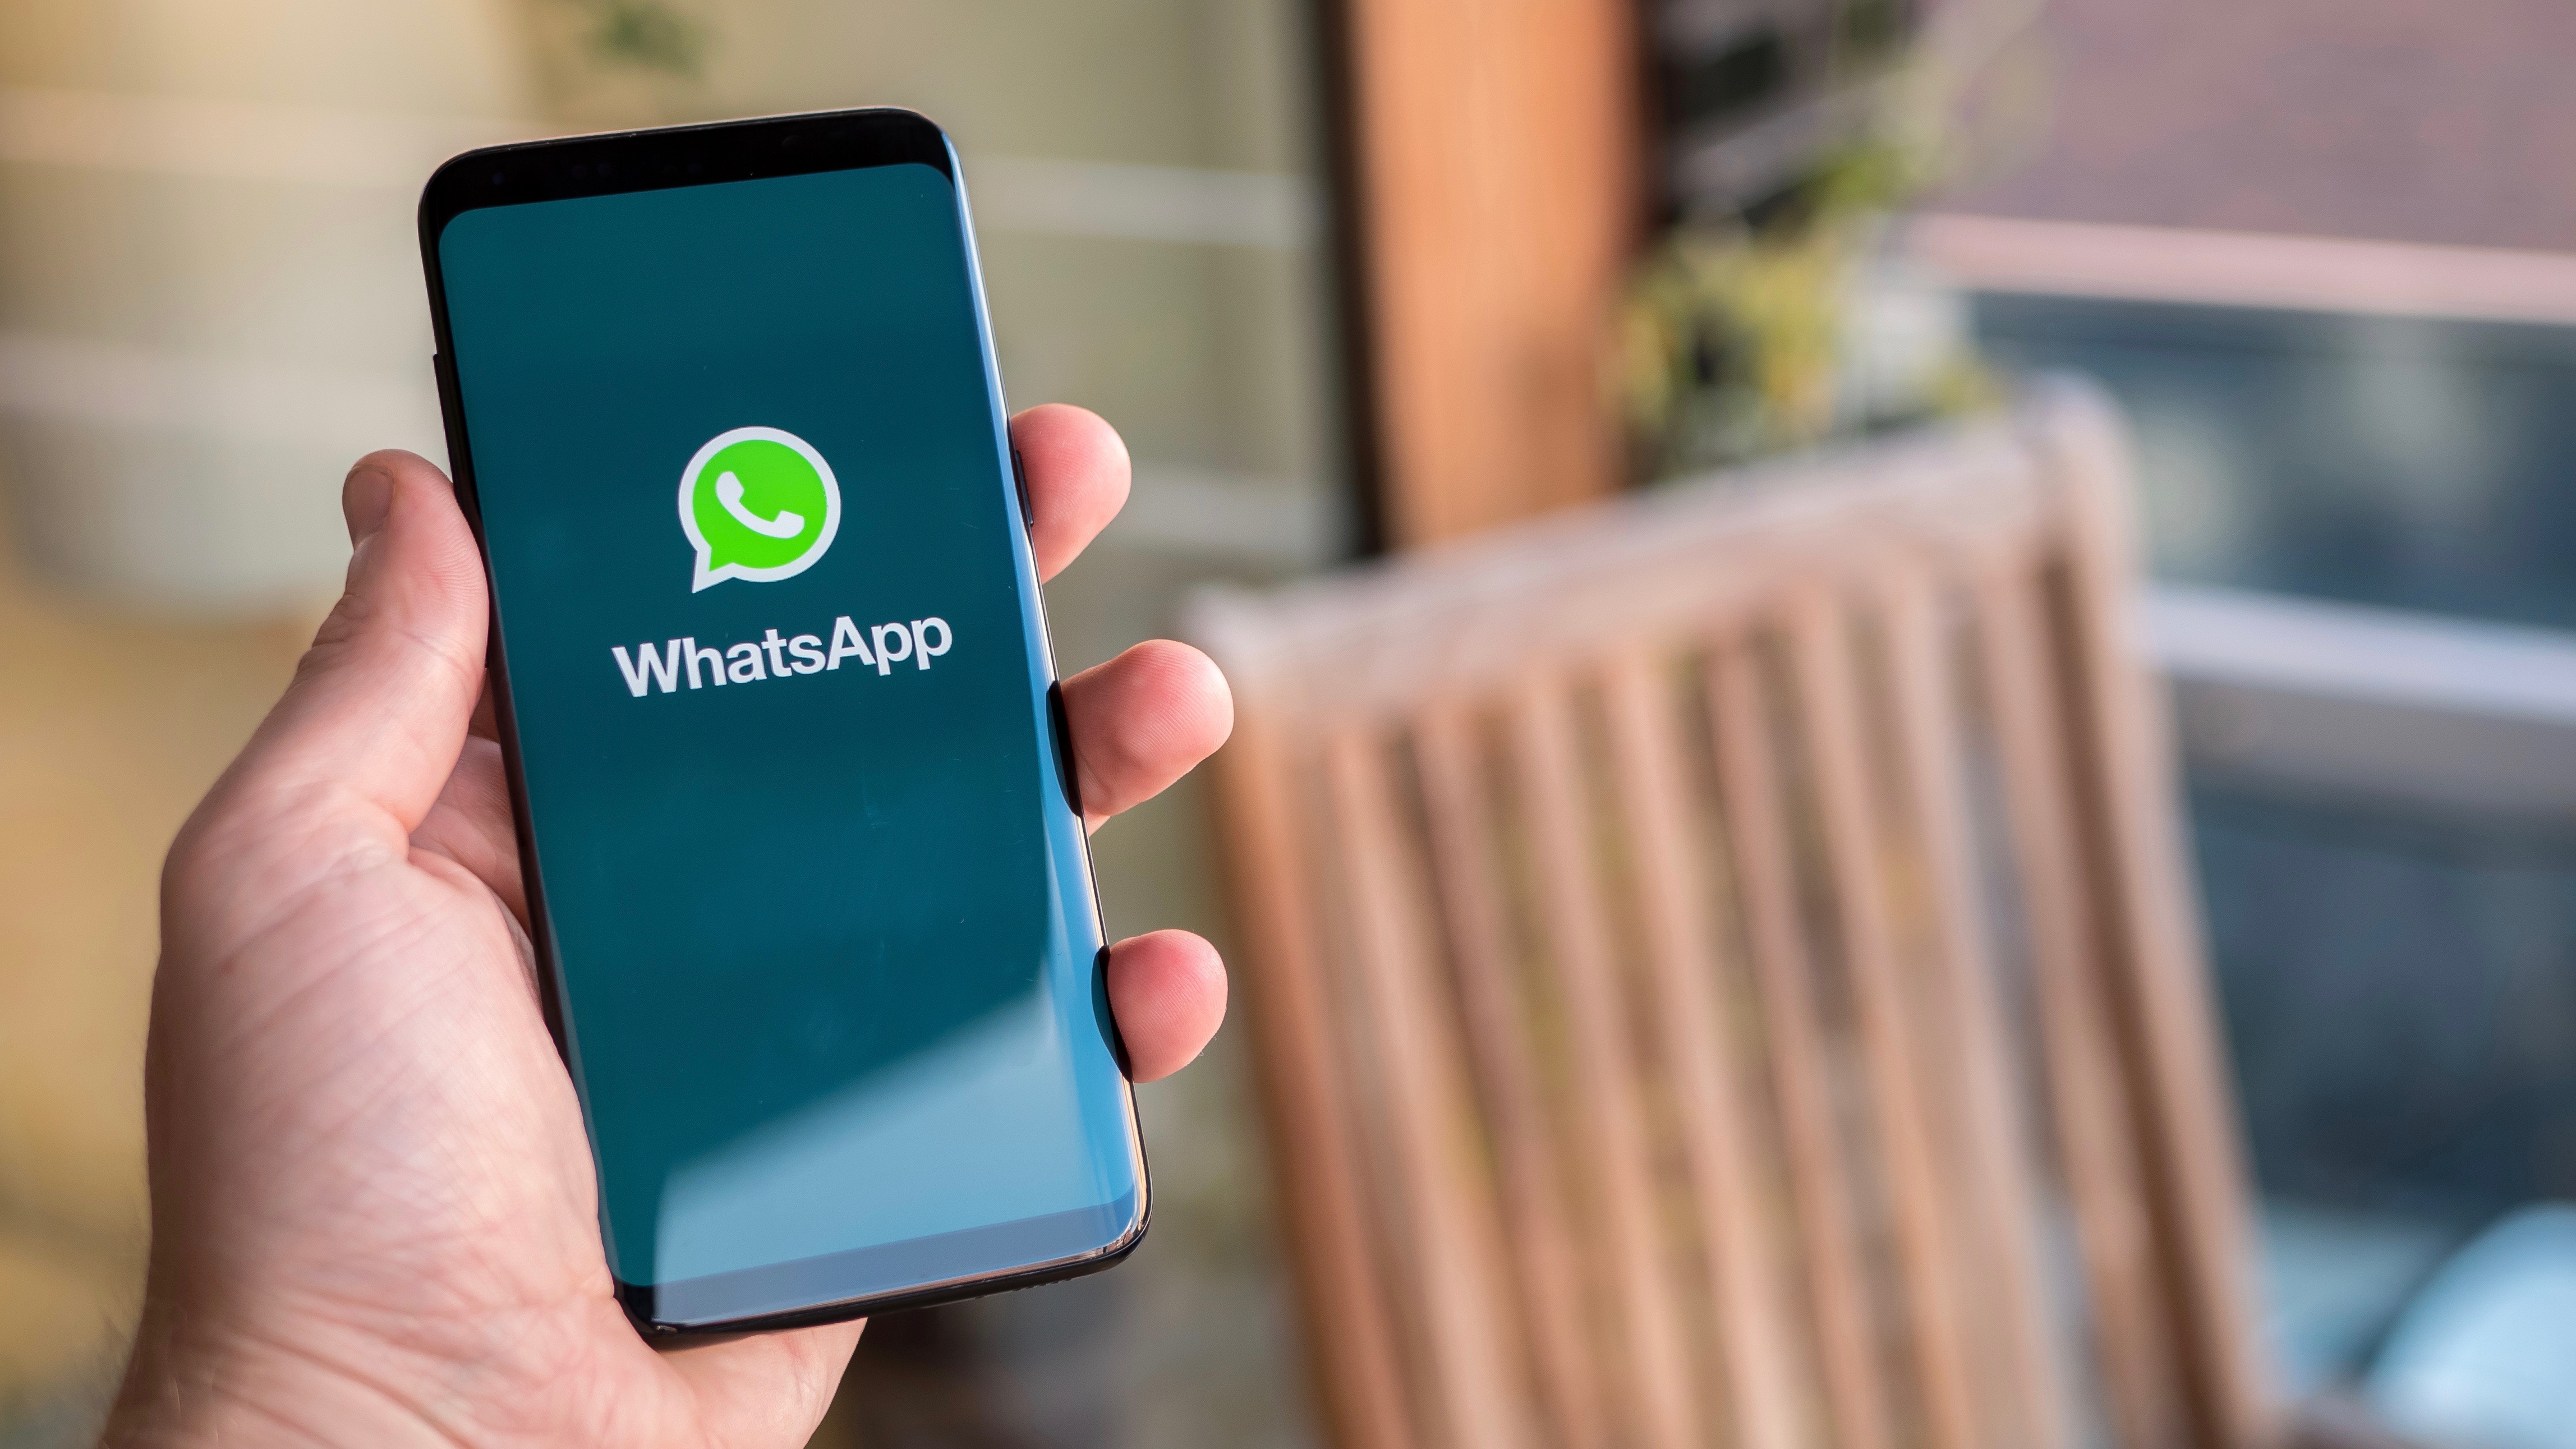 How to send disappearing messages on Whatsapp